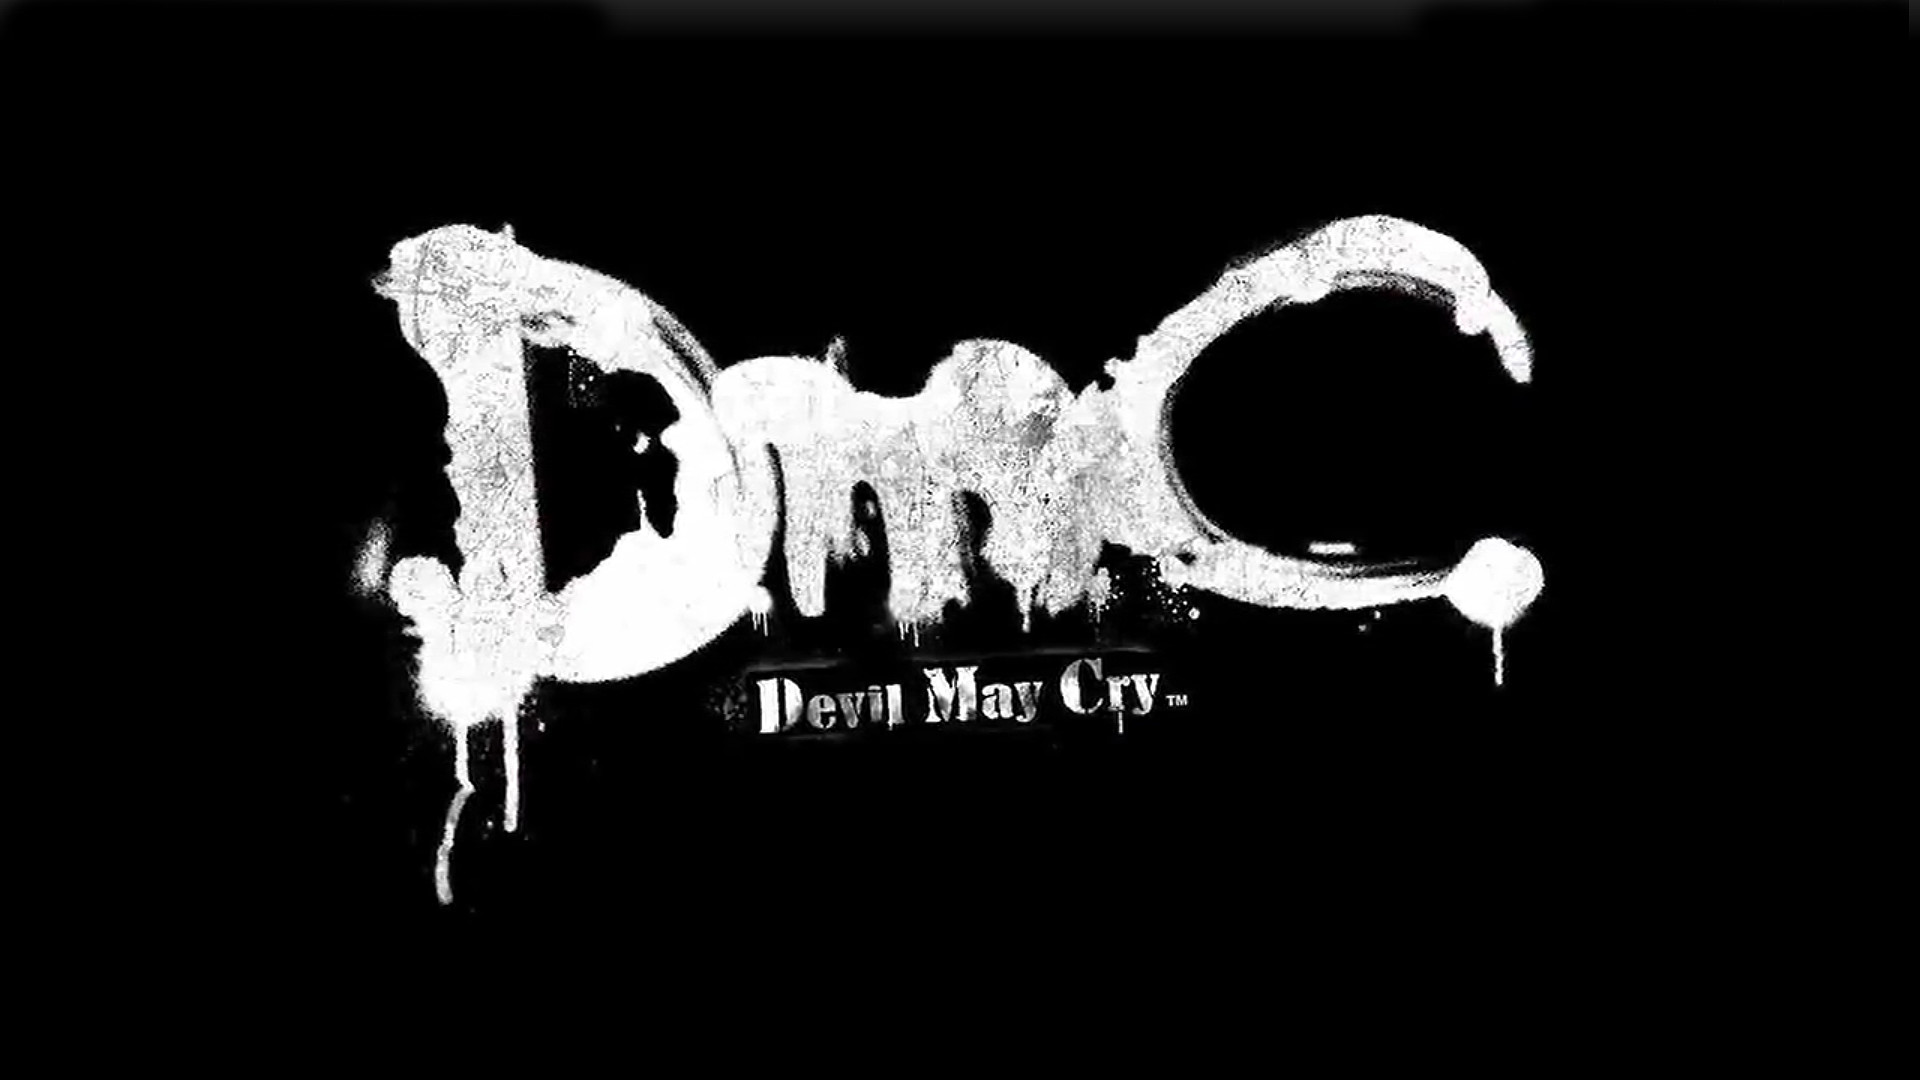 1920x1080 ... 100% Quality HD Devil May Cry HD Backgrounds,  px ...